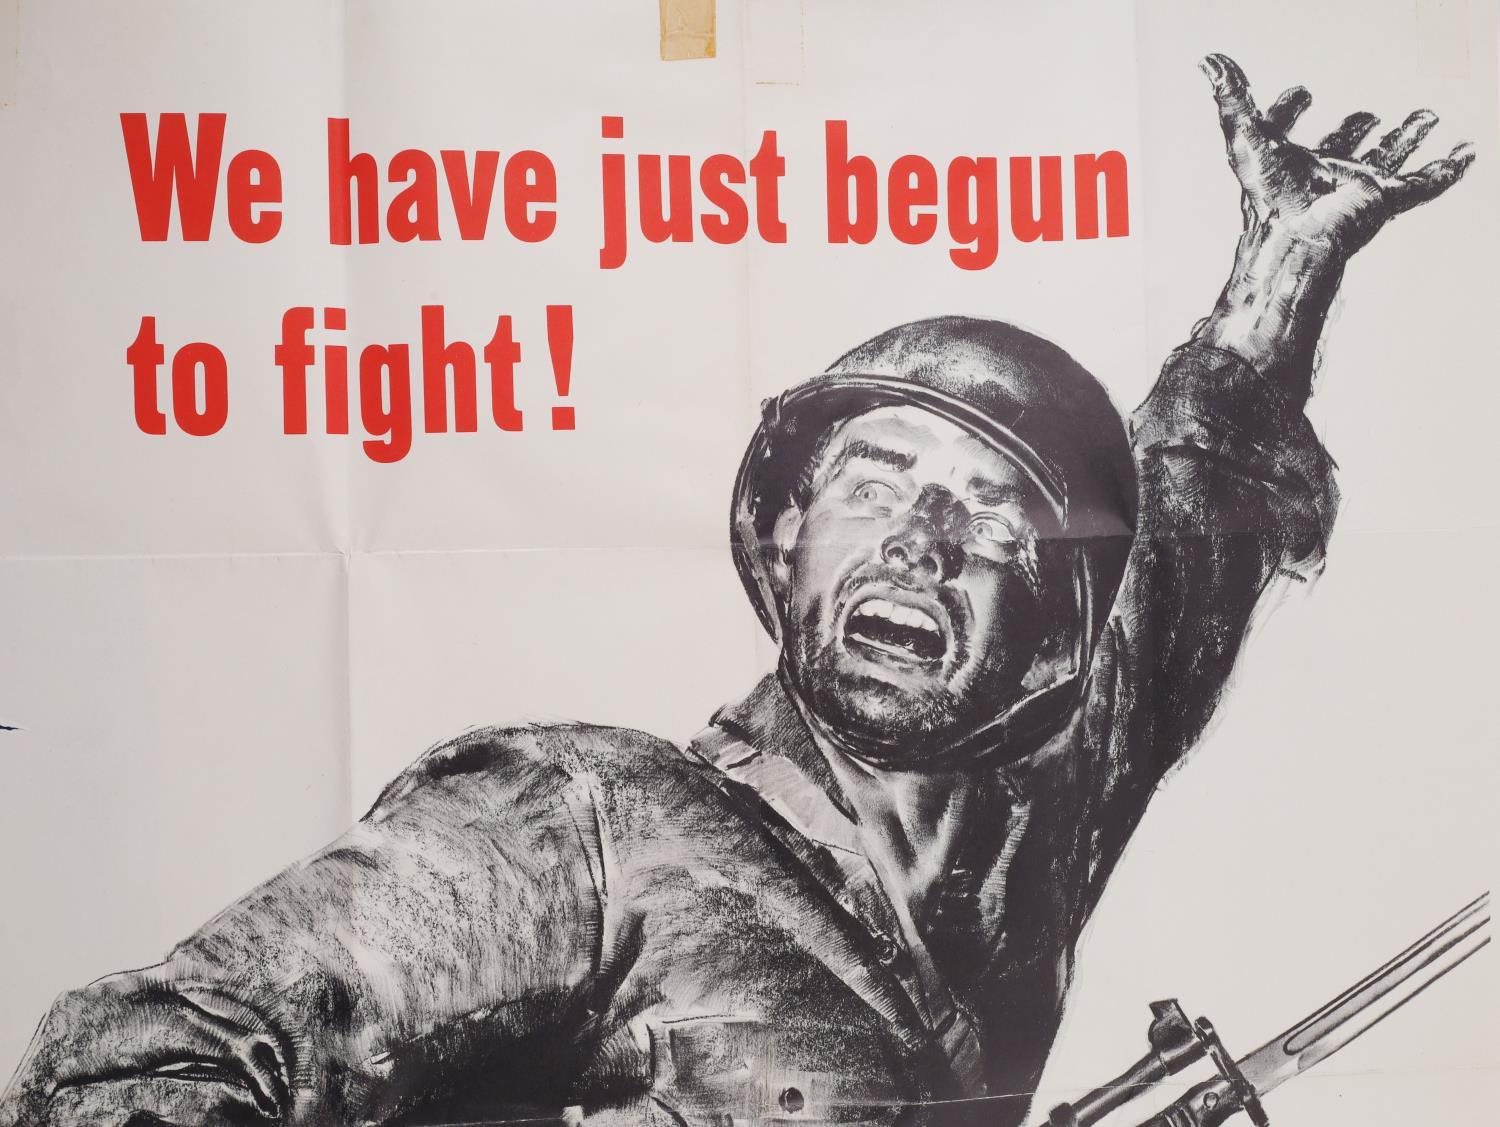 U.S. ARMY POSTER 1943 WE HAVE JUST BEGUN TO FIGHT